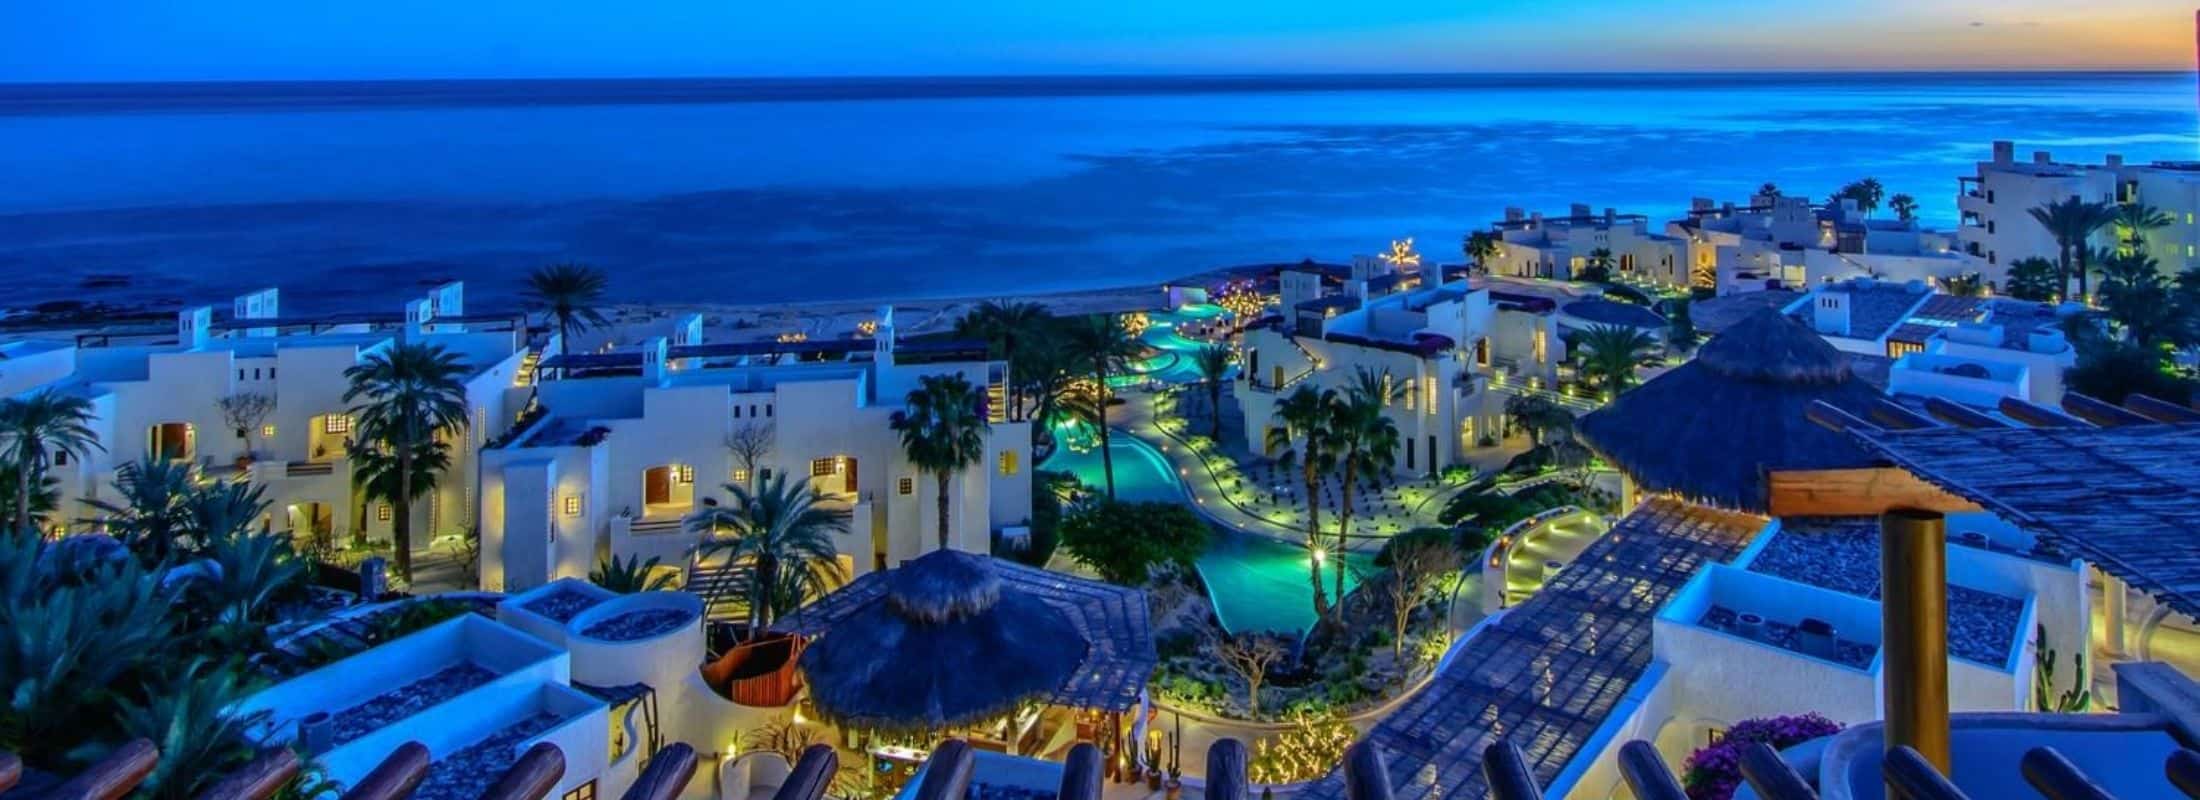 Las Ventanas at night time with pool and houses over looking the ocean